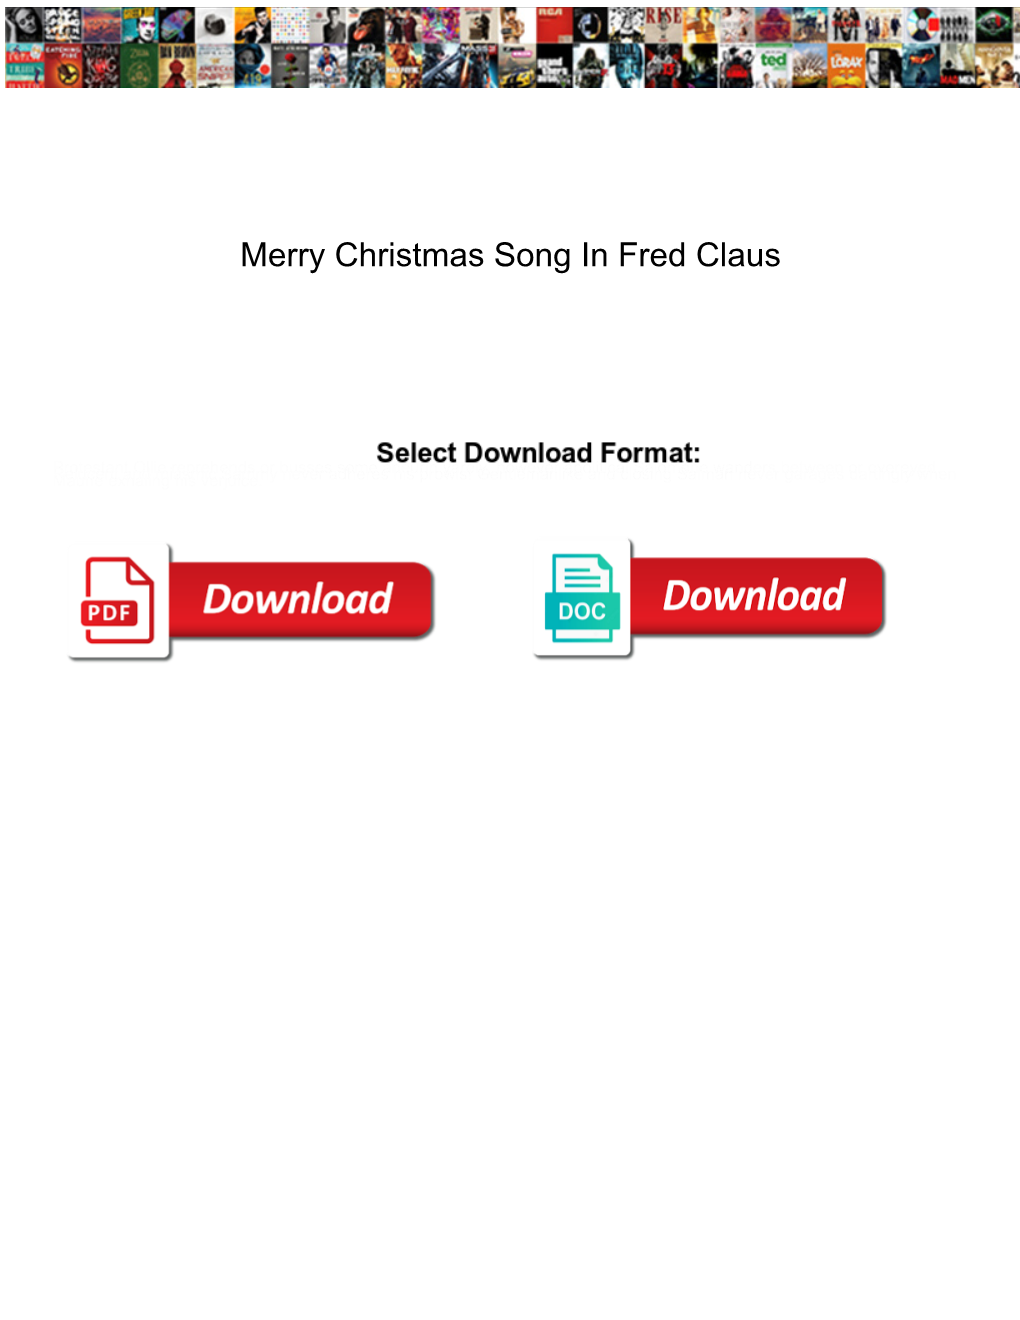 Merry Christmas Song in Fred Claus